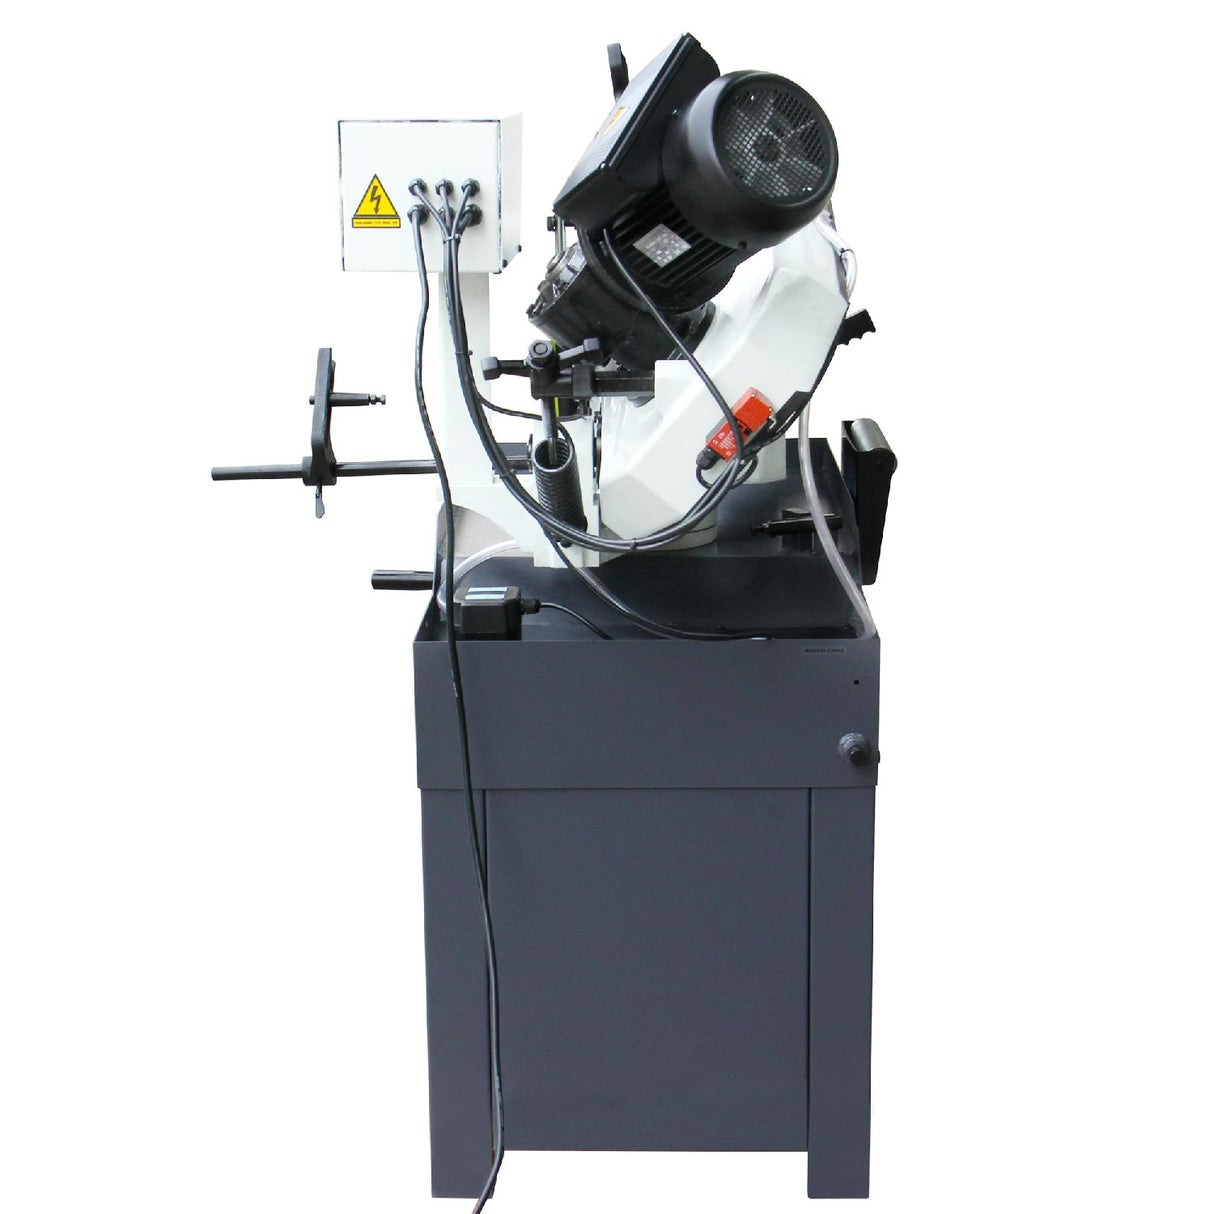 KANG Industrial BS-108G Miter Band Saw, 240V Motor. 260x200mm Capacity with Front Control Panel